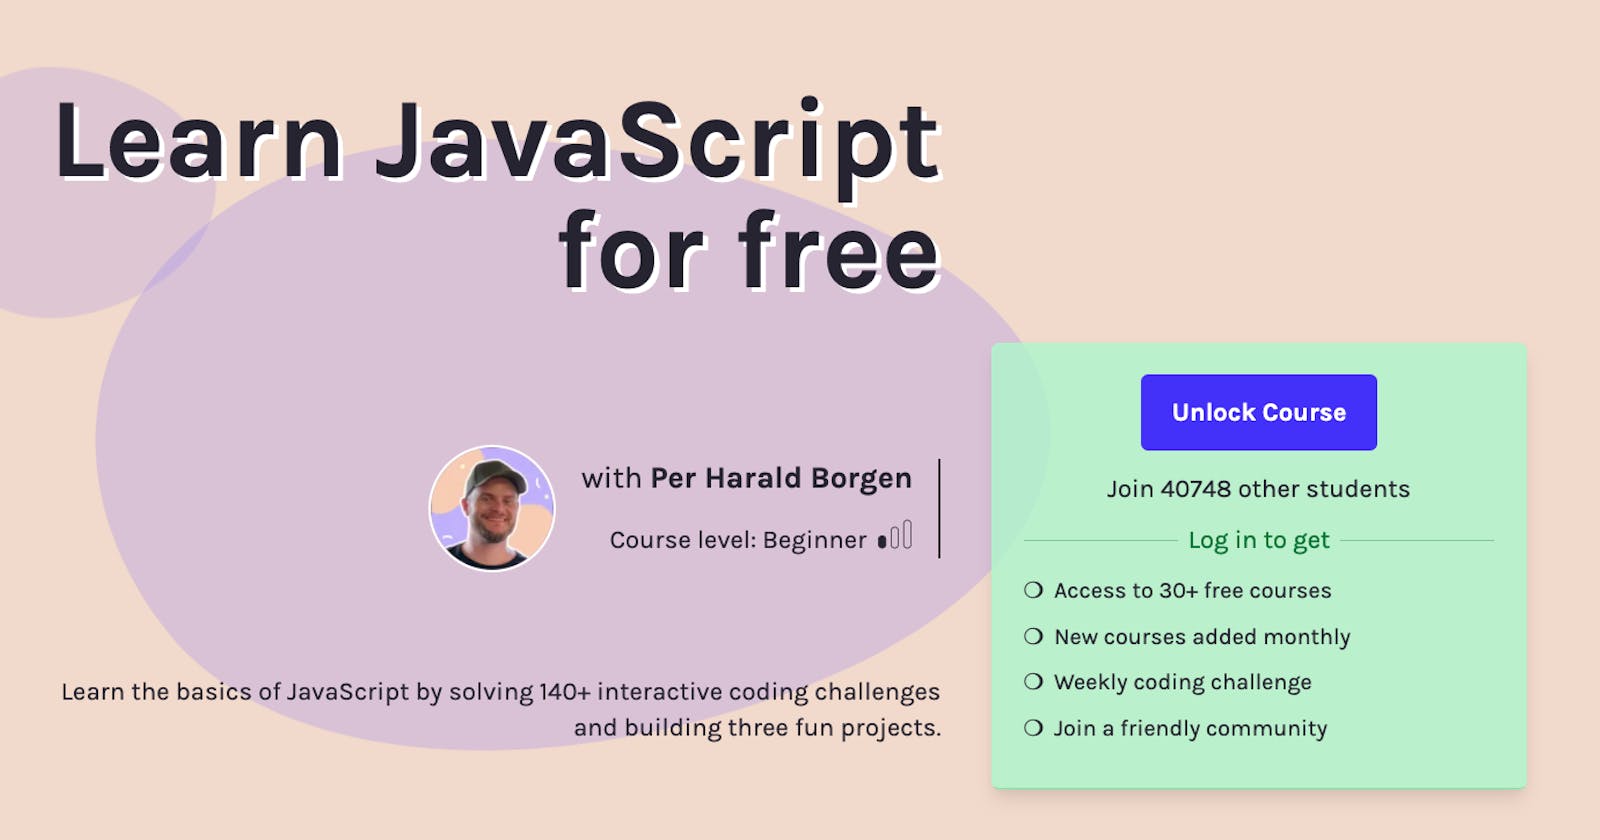 Brief review of Scrimba's intro to learning Javascript